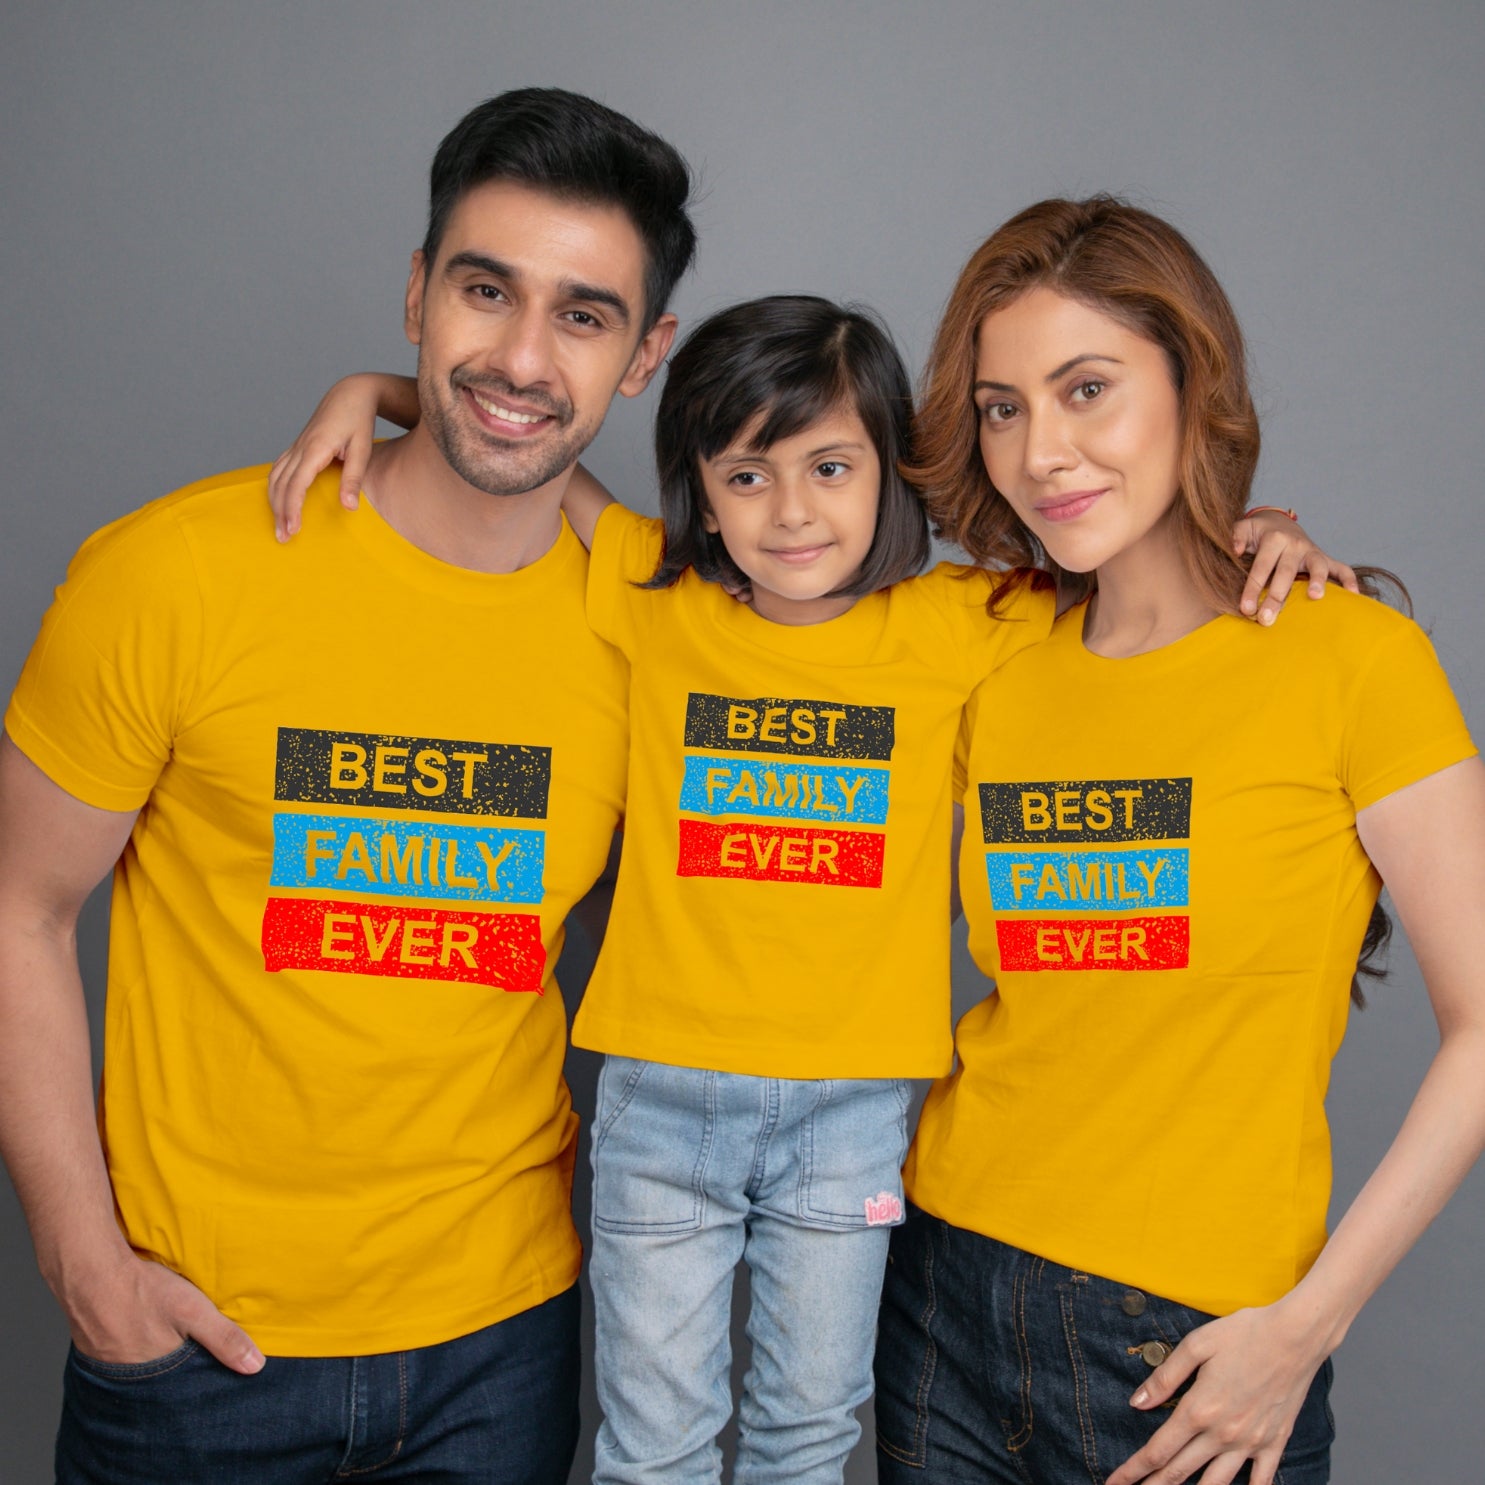 Family t shirt set of 3 Mom Dad Daughter in Yellow Colour - Best Family Ever Variant